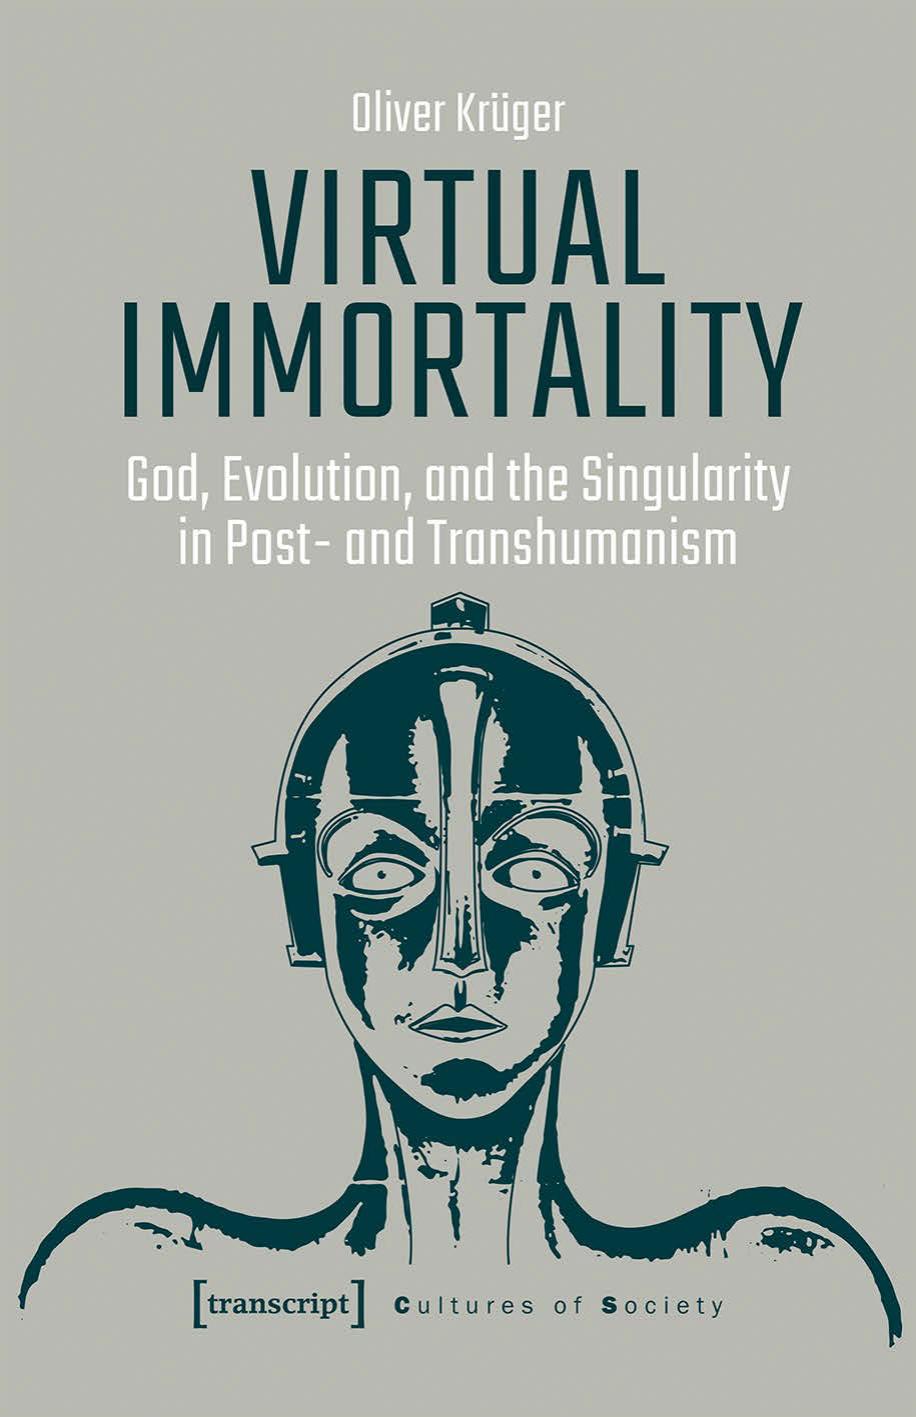 Virtual Immortality - God, Evolution and the Singularity in Post- and Transhumanism